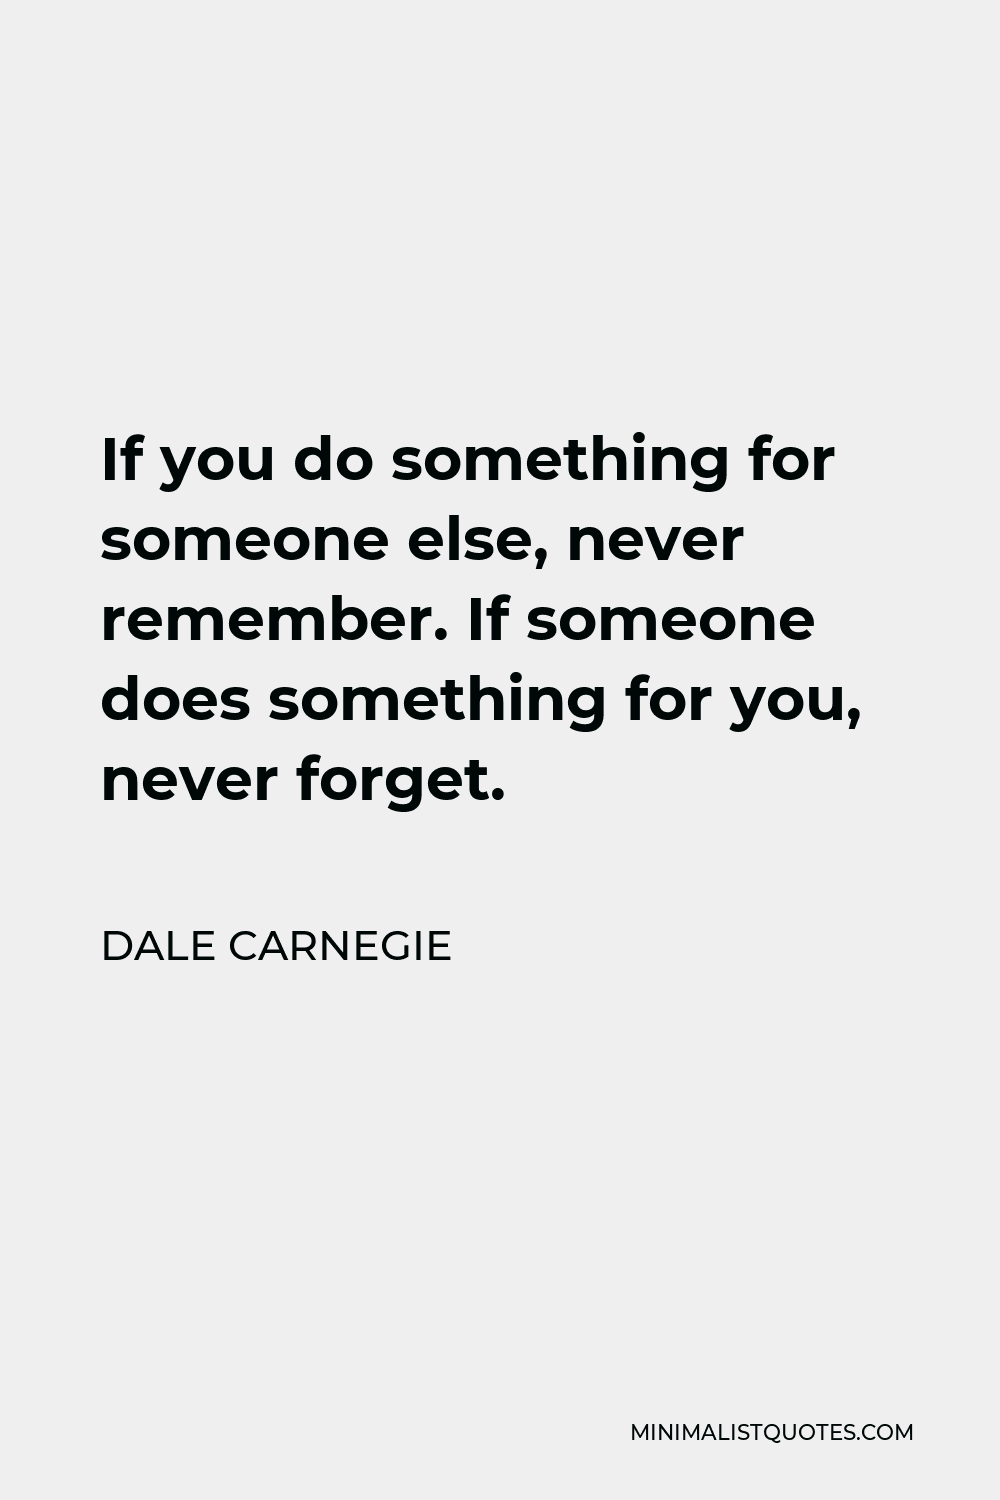 Dale Carnegie Quote - If you do something for someone else, never remember. If someone does something for you, never forget.